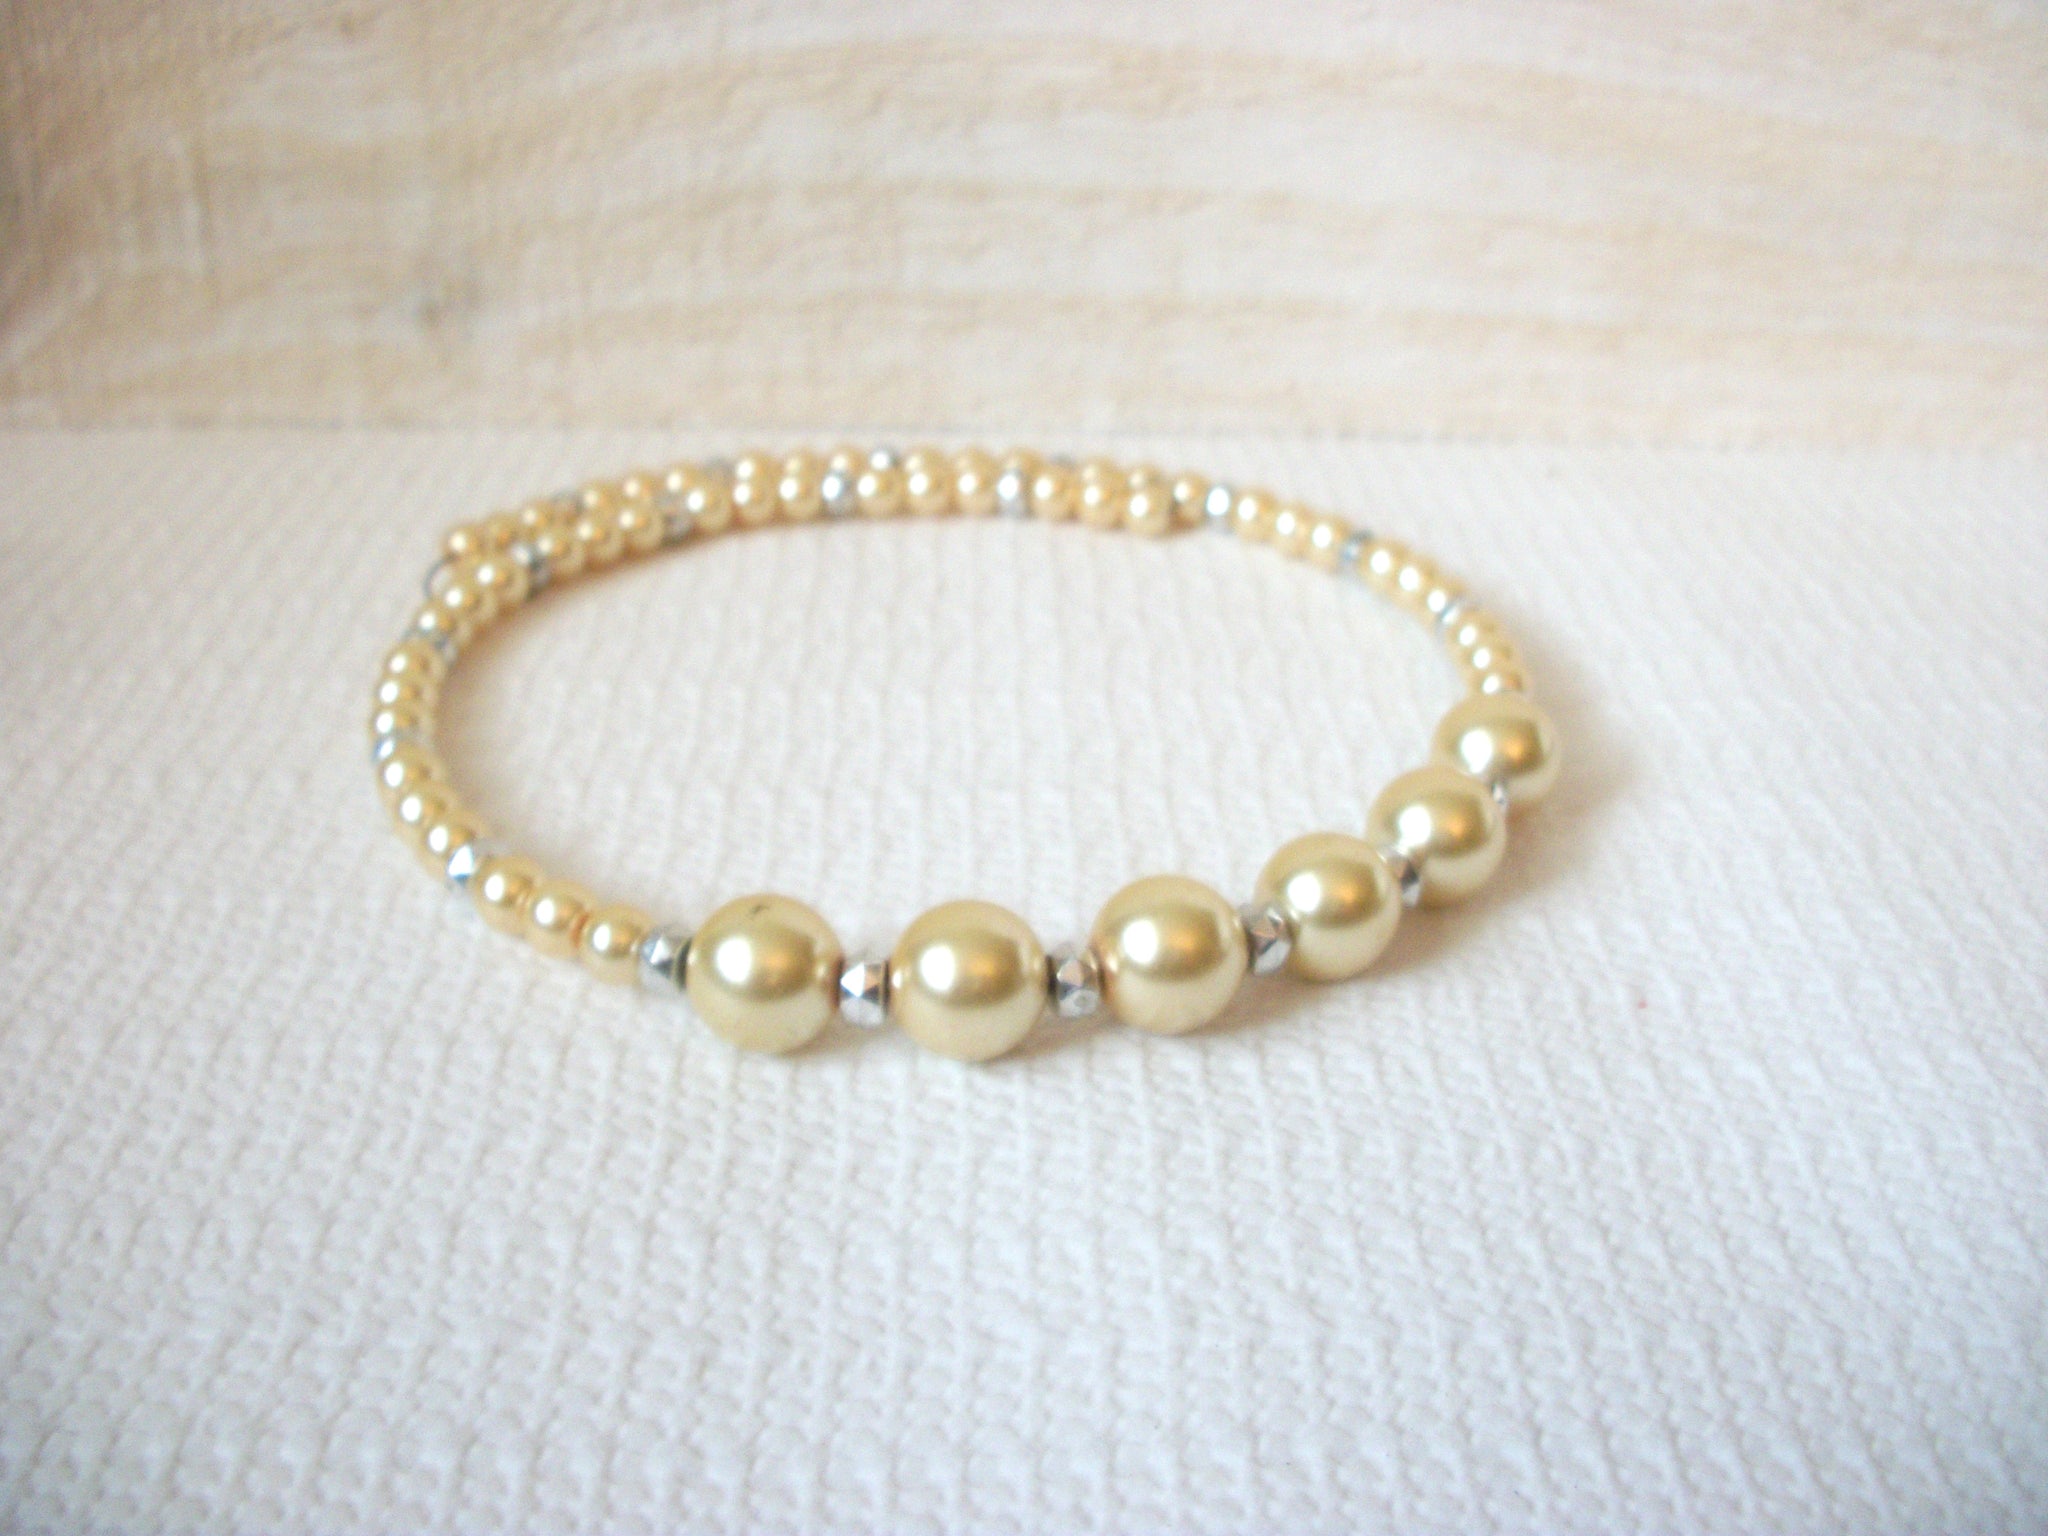 Retro Palest Yellow Faux Pearl Choker Necklace 51020